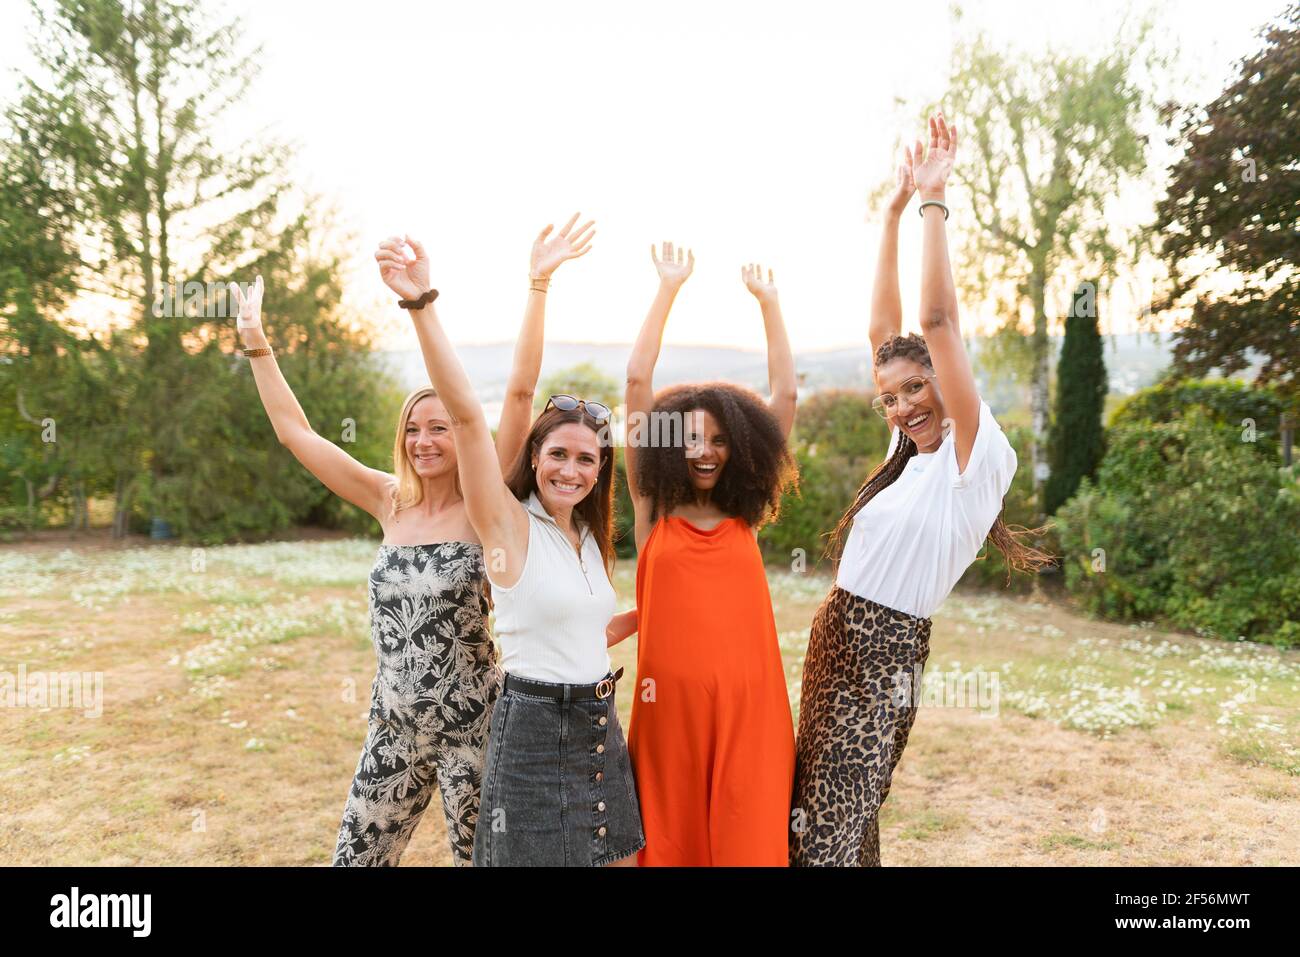 Cheerful female friends with hands raised at park Stock Photo